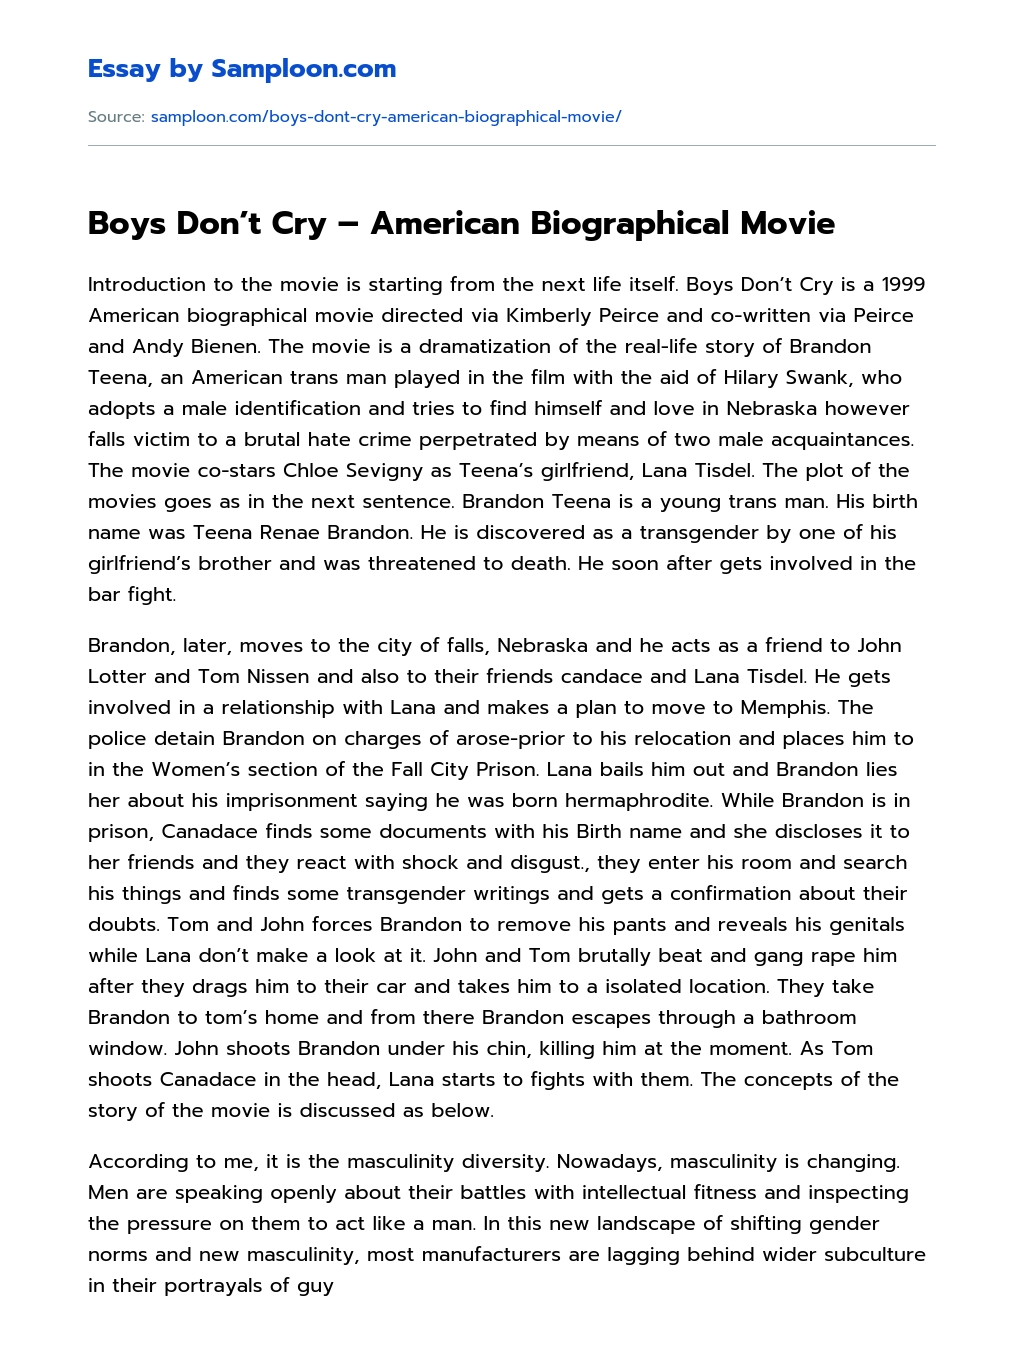 Boys Don’t Cry – American Biographical Movie essay